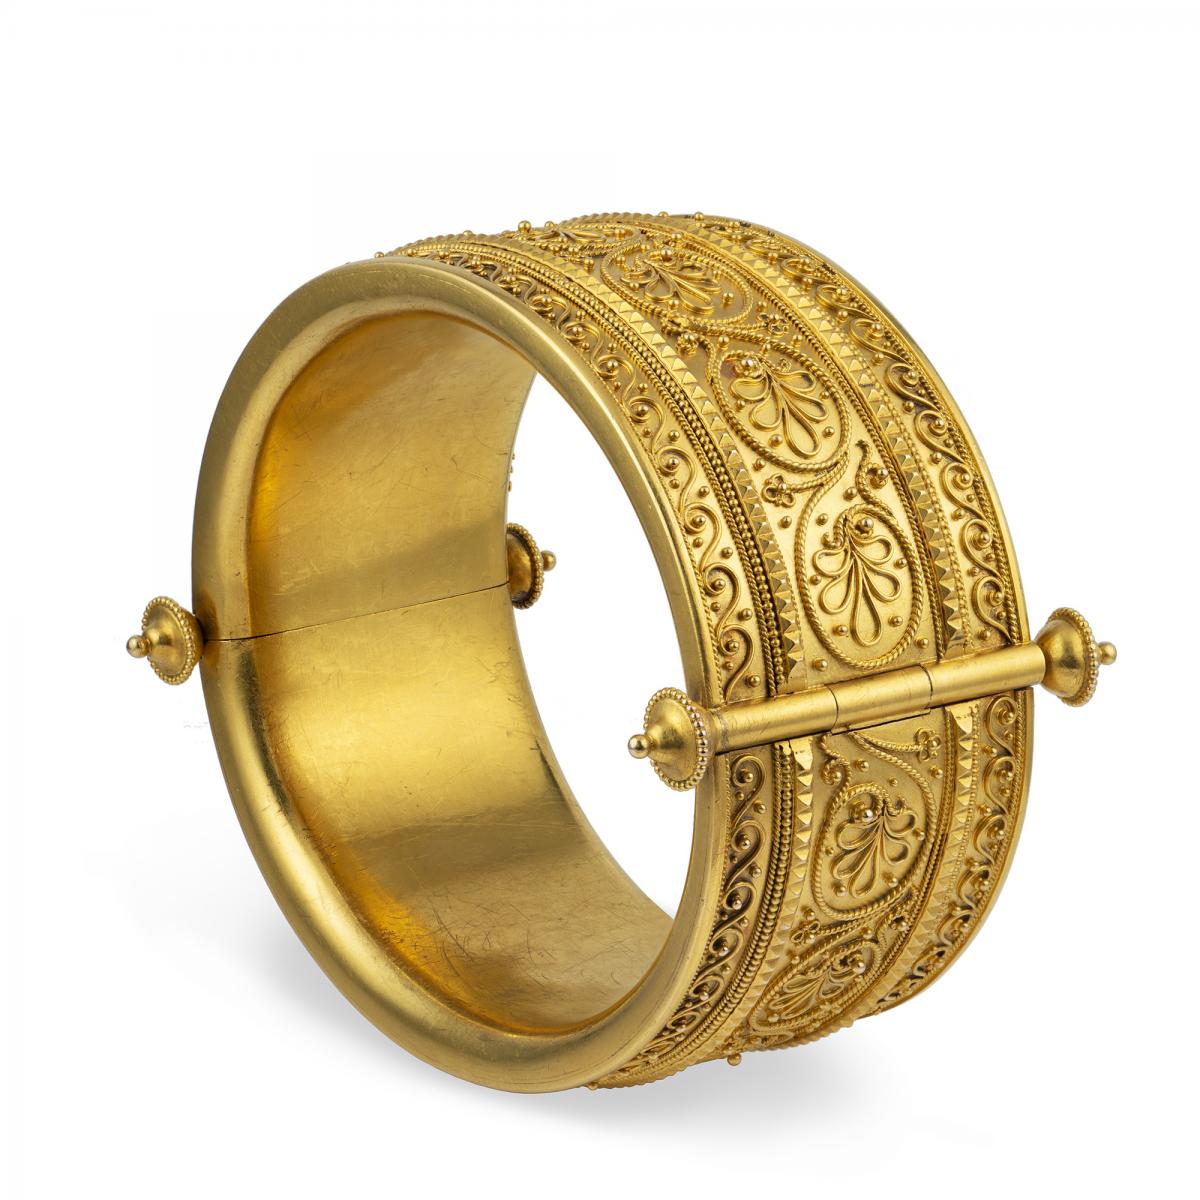 A Wide Archaeological Revival Gold Bangle, with Etruscan-Style Wirework Decoration, Circa 1870